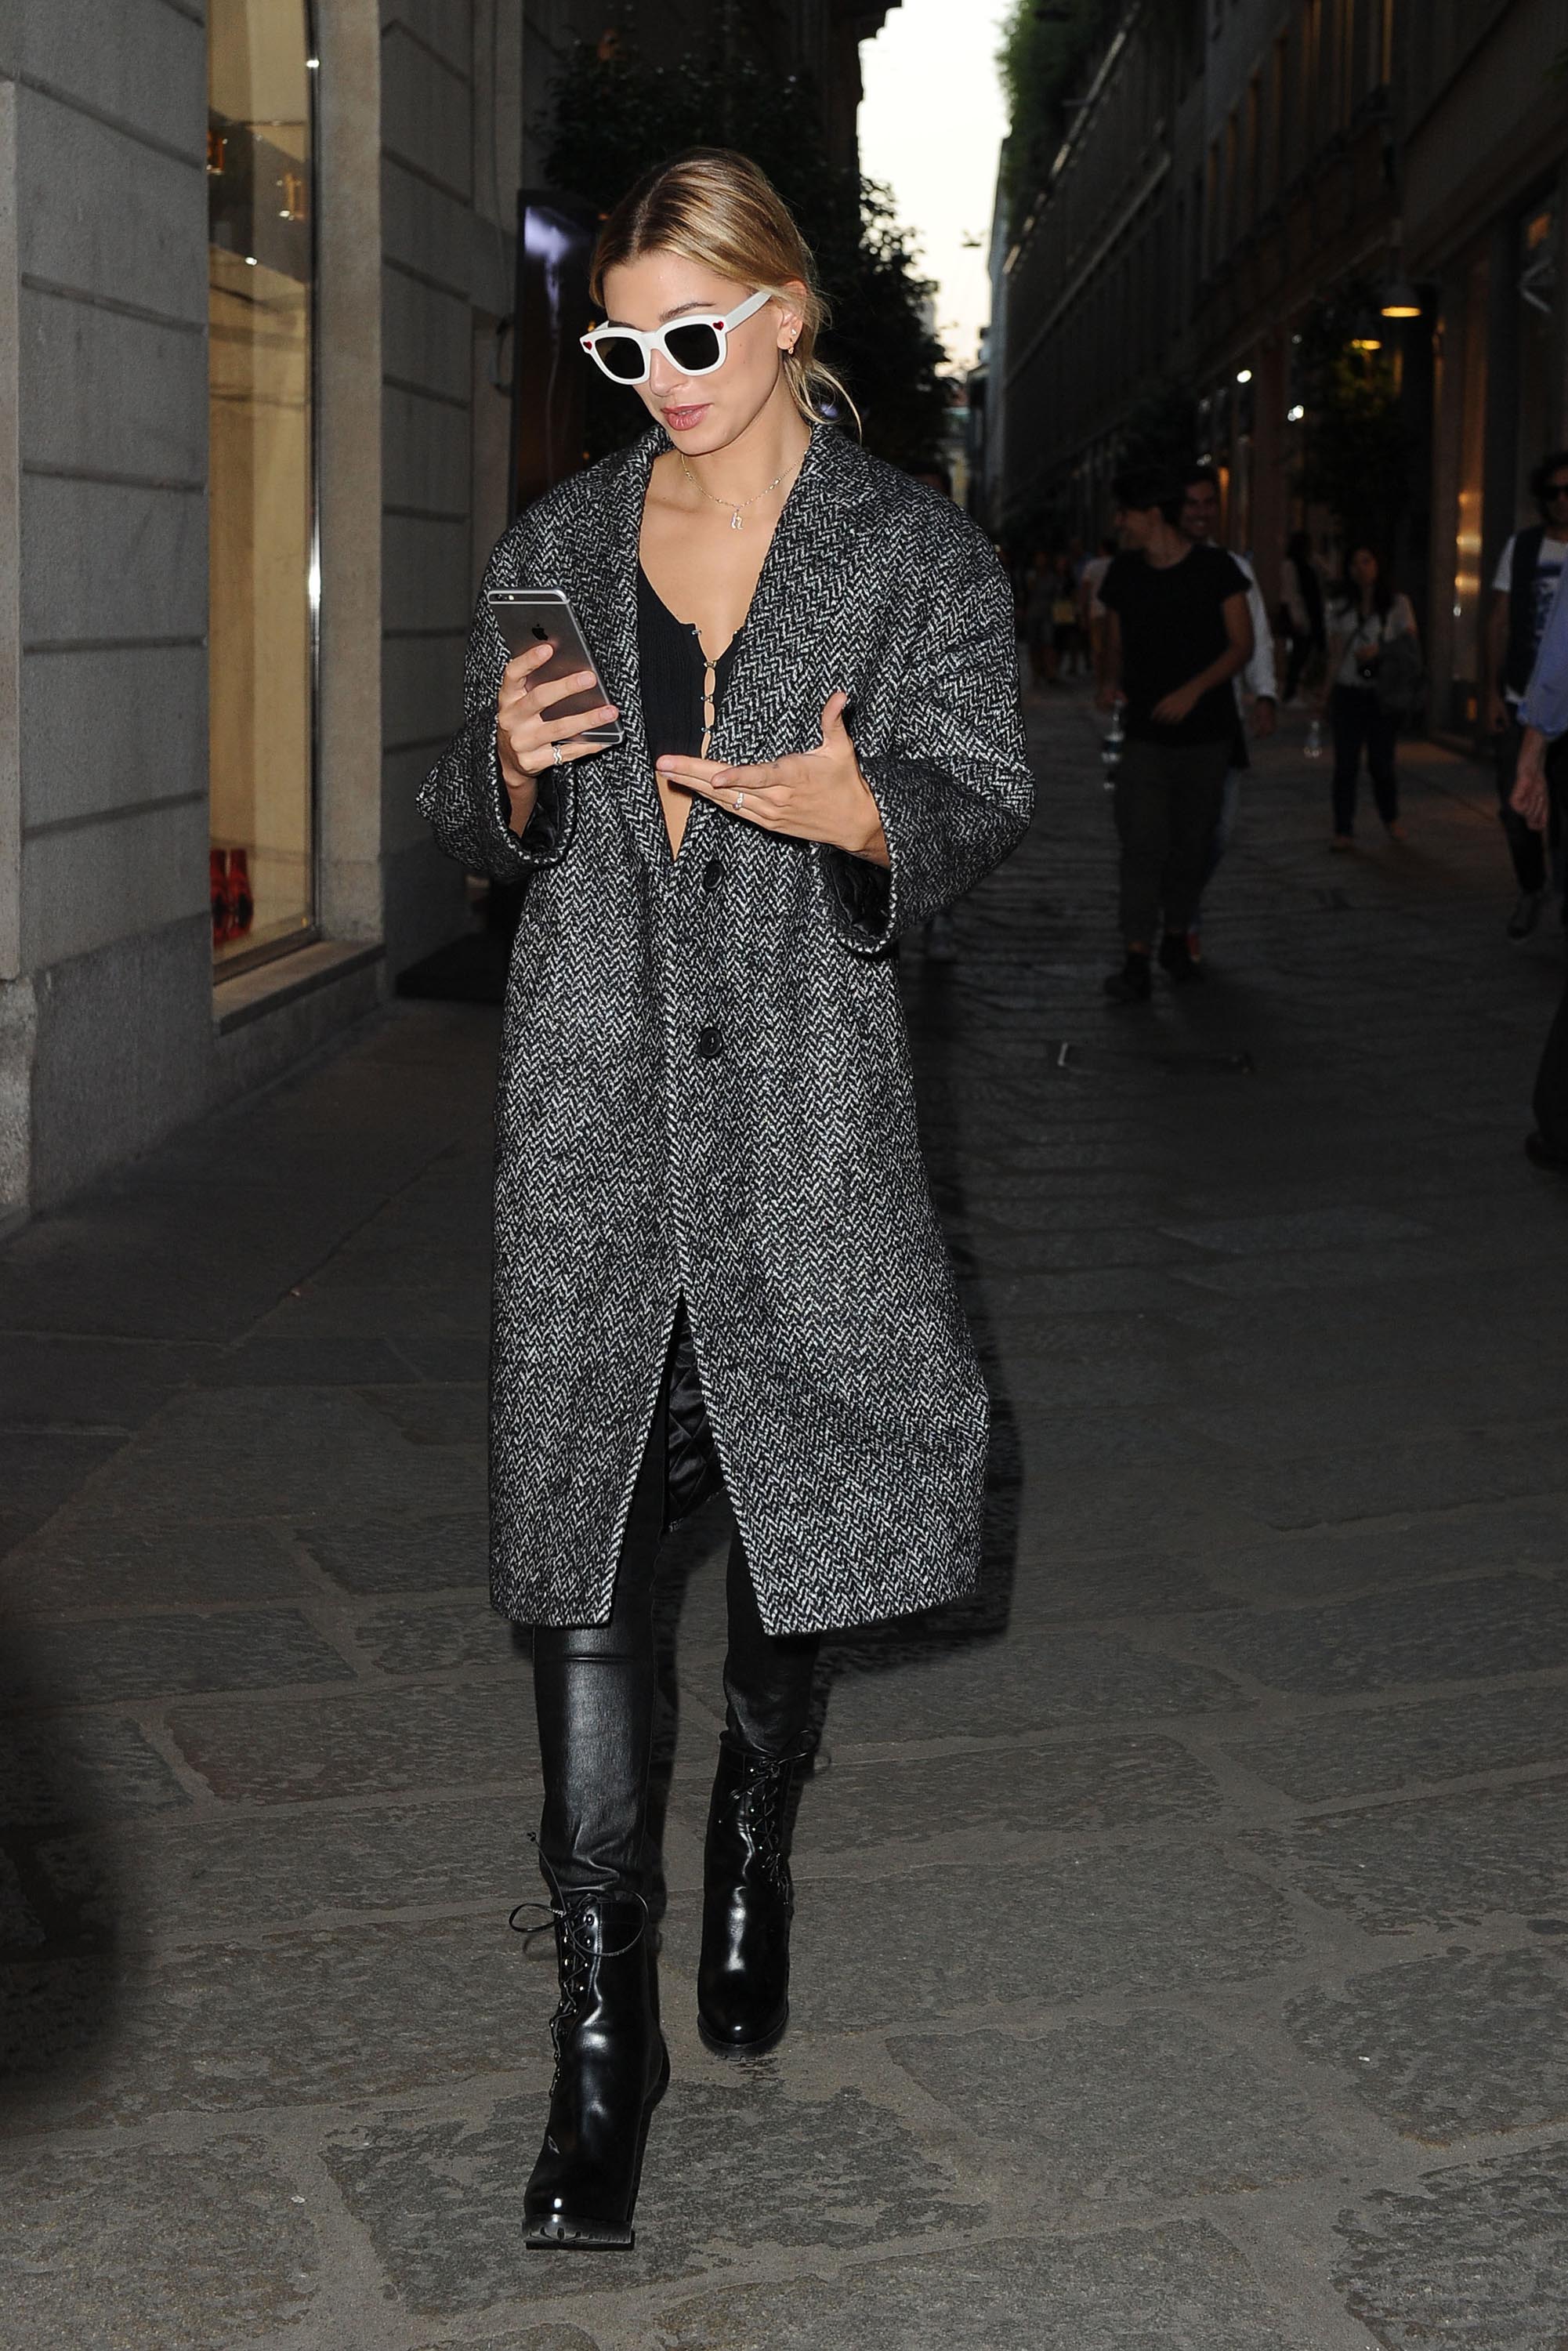 Hailey Baldwin out and about in Milan